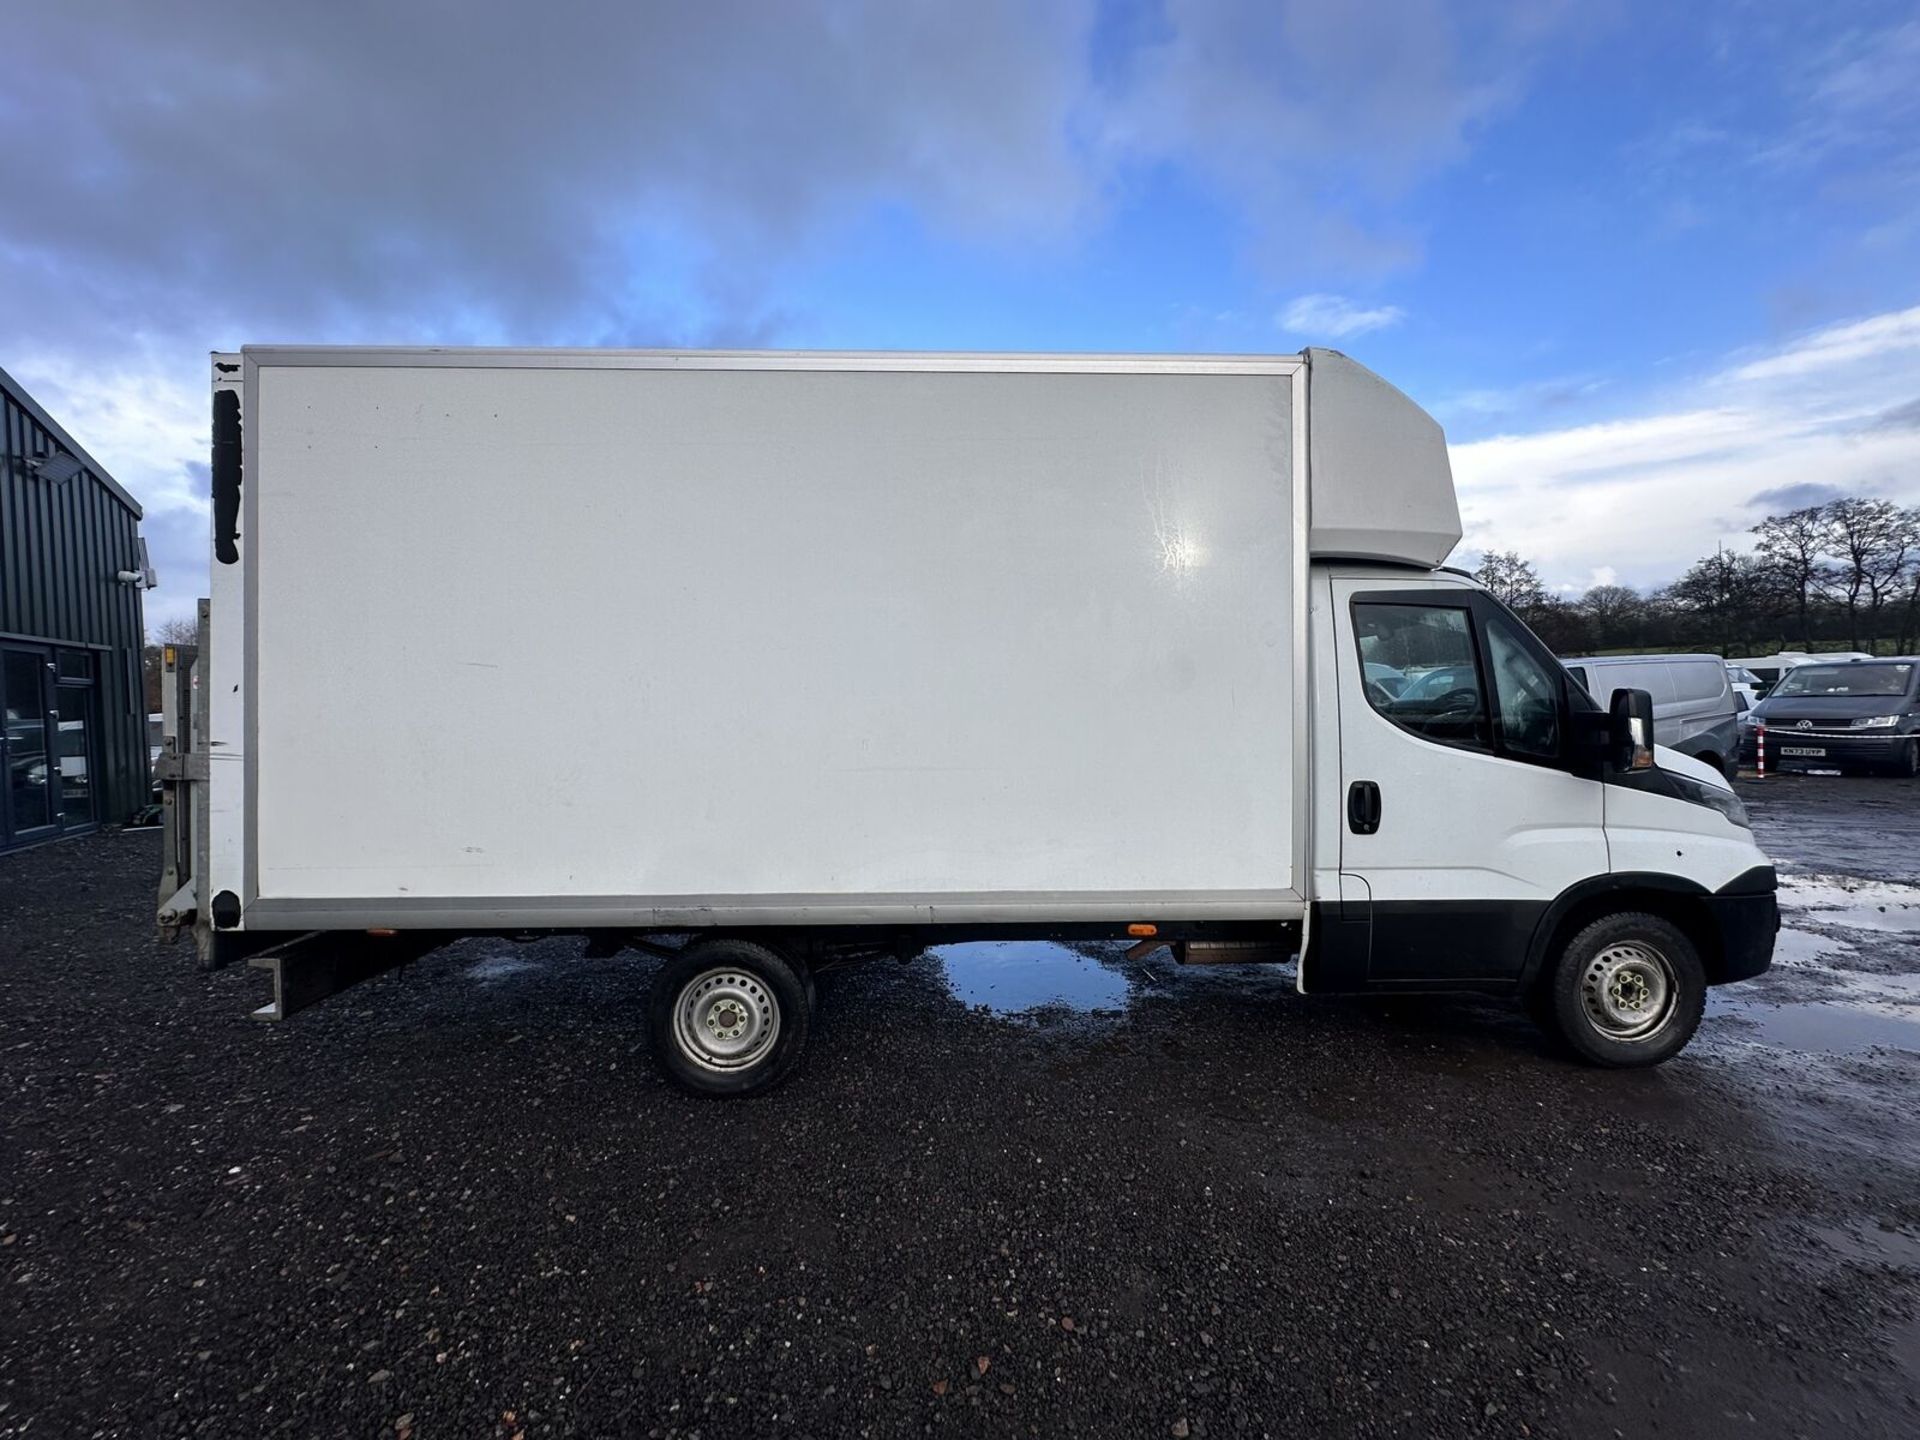 MECHANICAL NOTICE: 66 PLATE IVECO DAILY, GEARBOX WARNING - NO VAT ON HAMMER